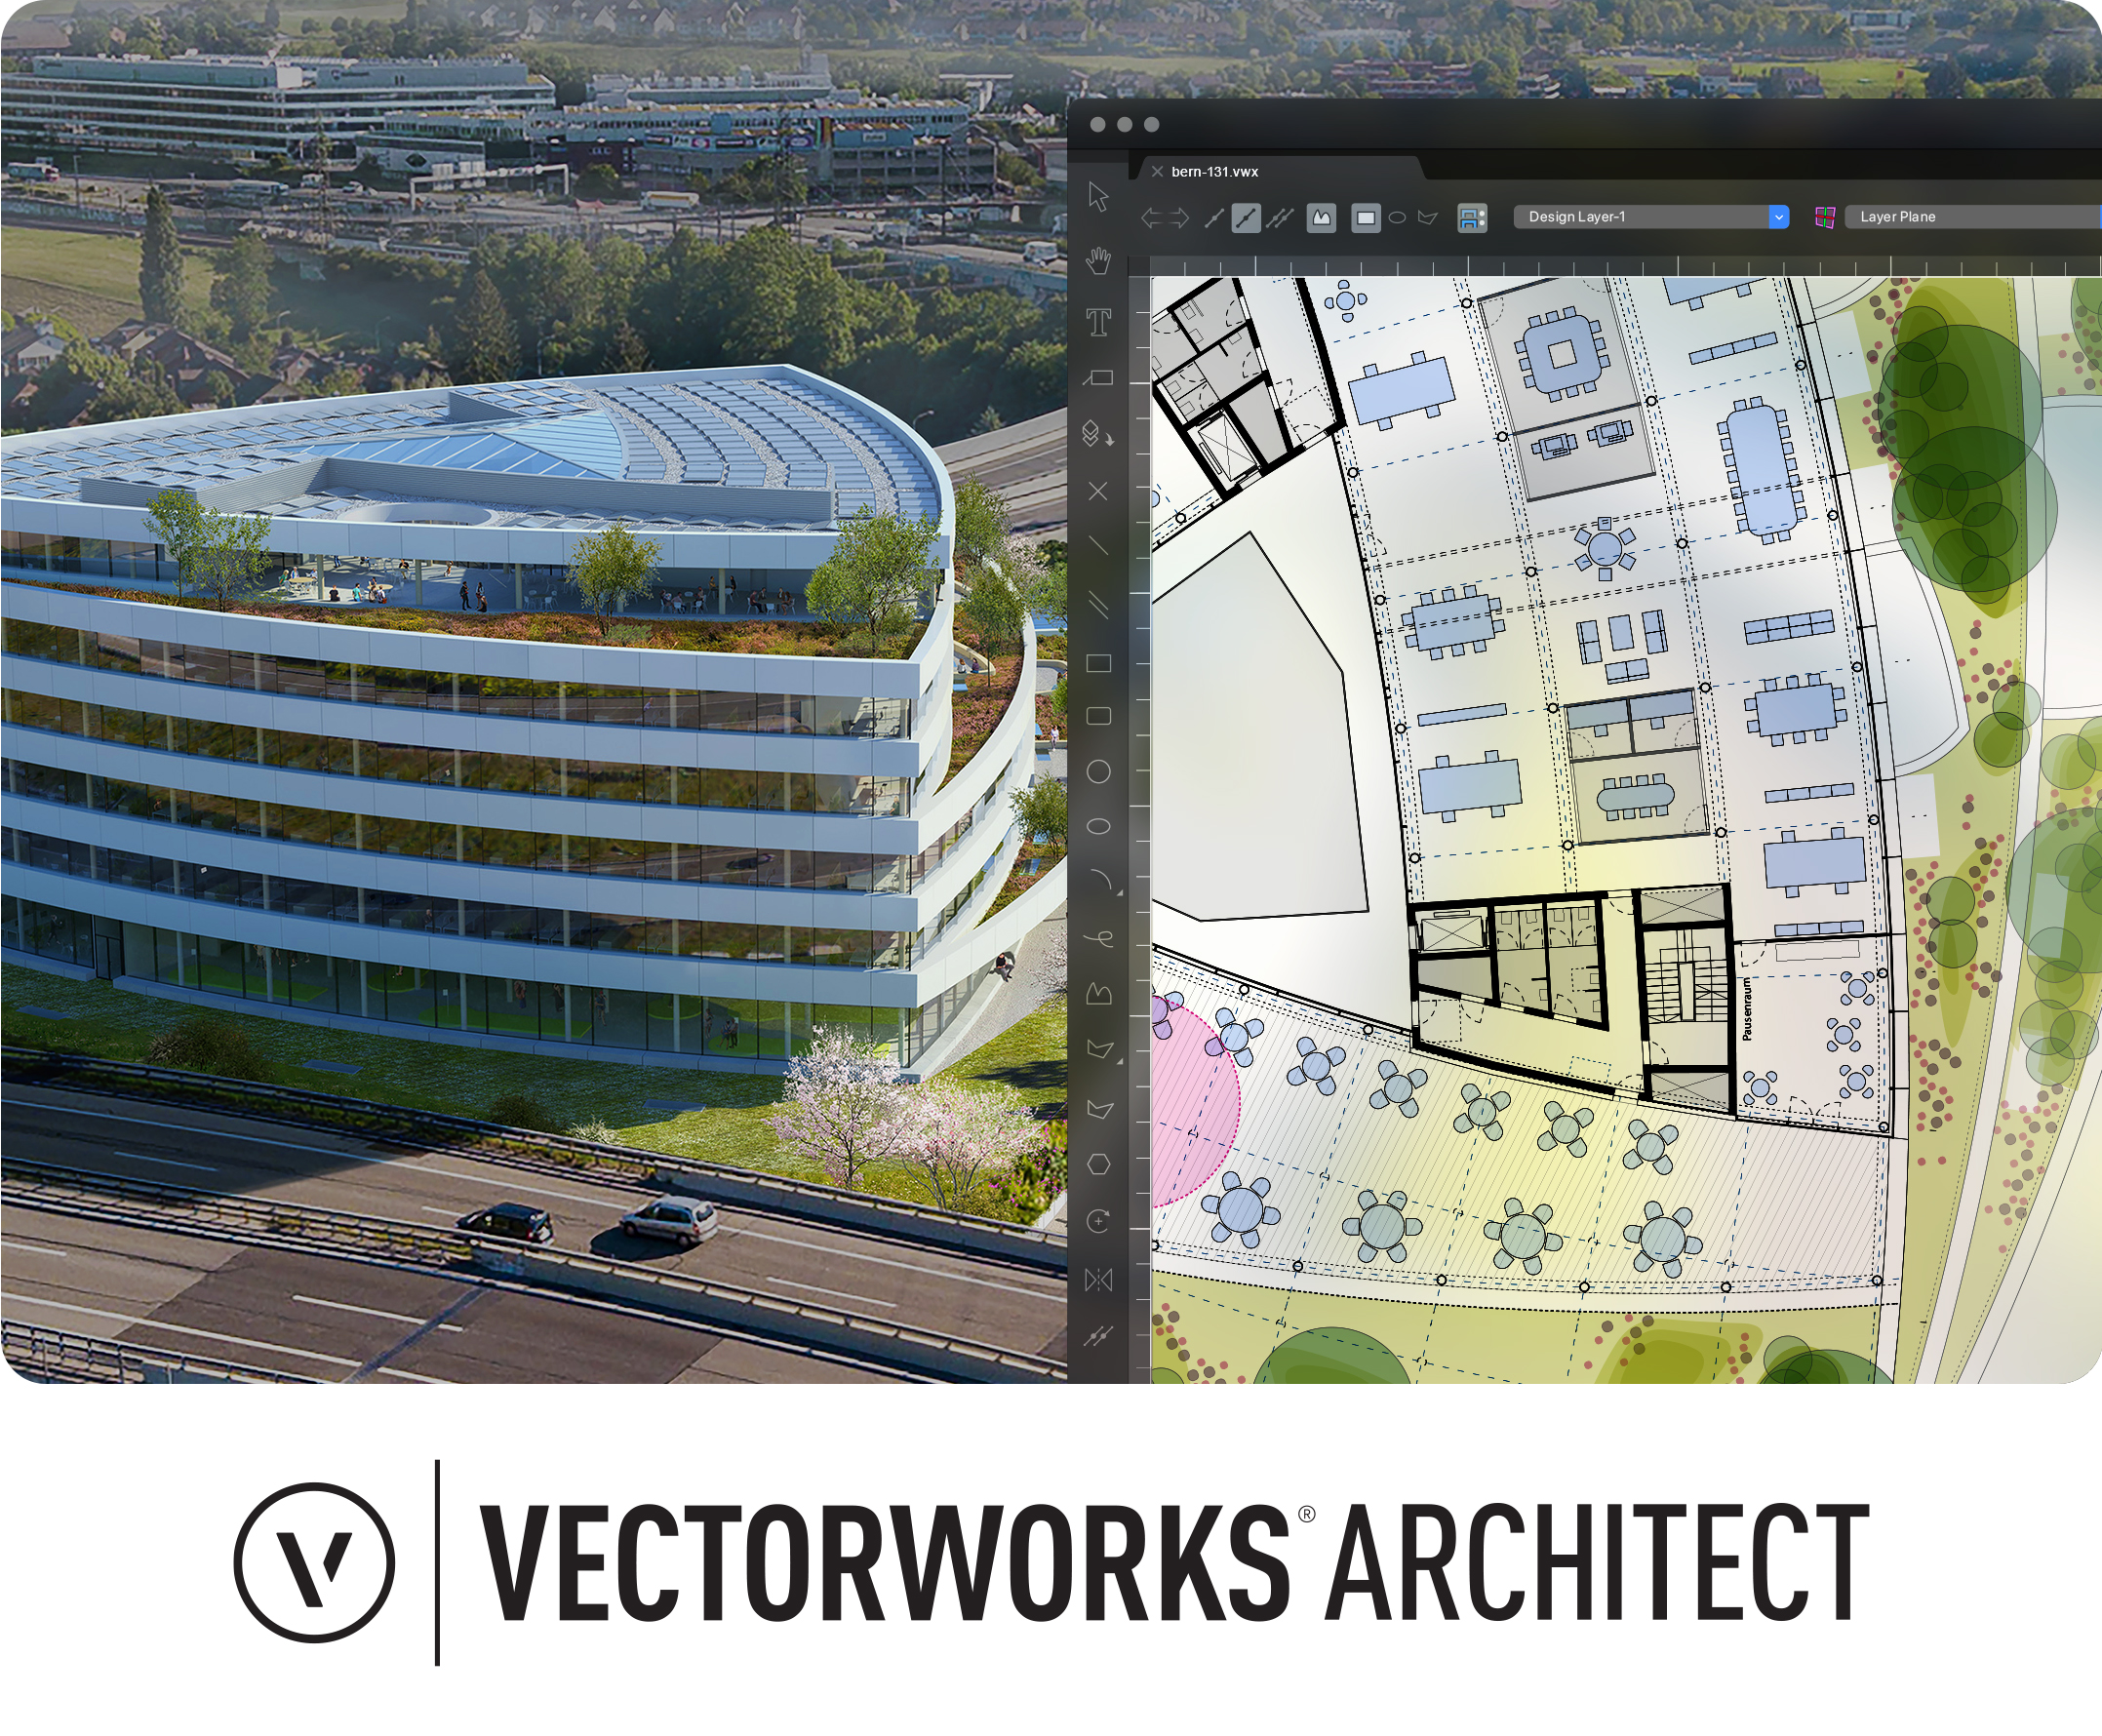 Deep Insights about Vectorworks 2023 — Execs Talk to Architosh